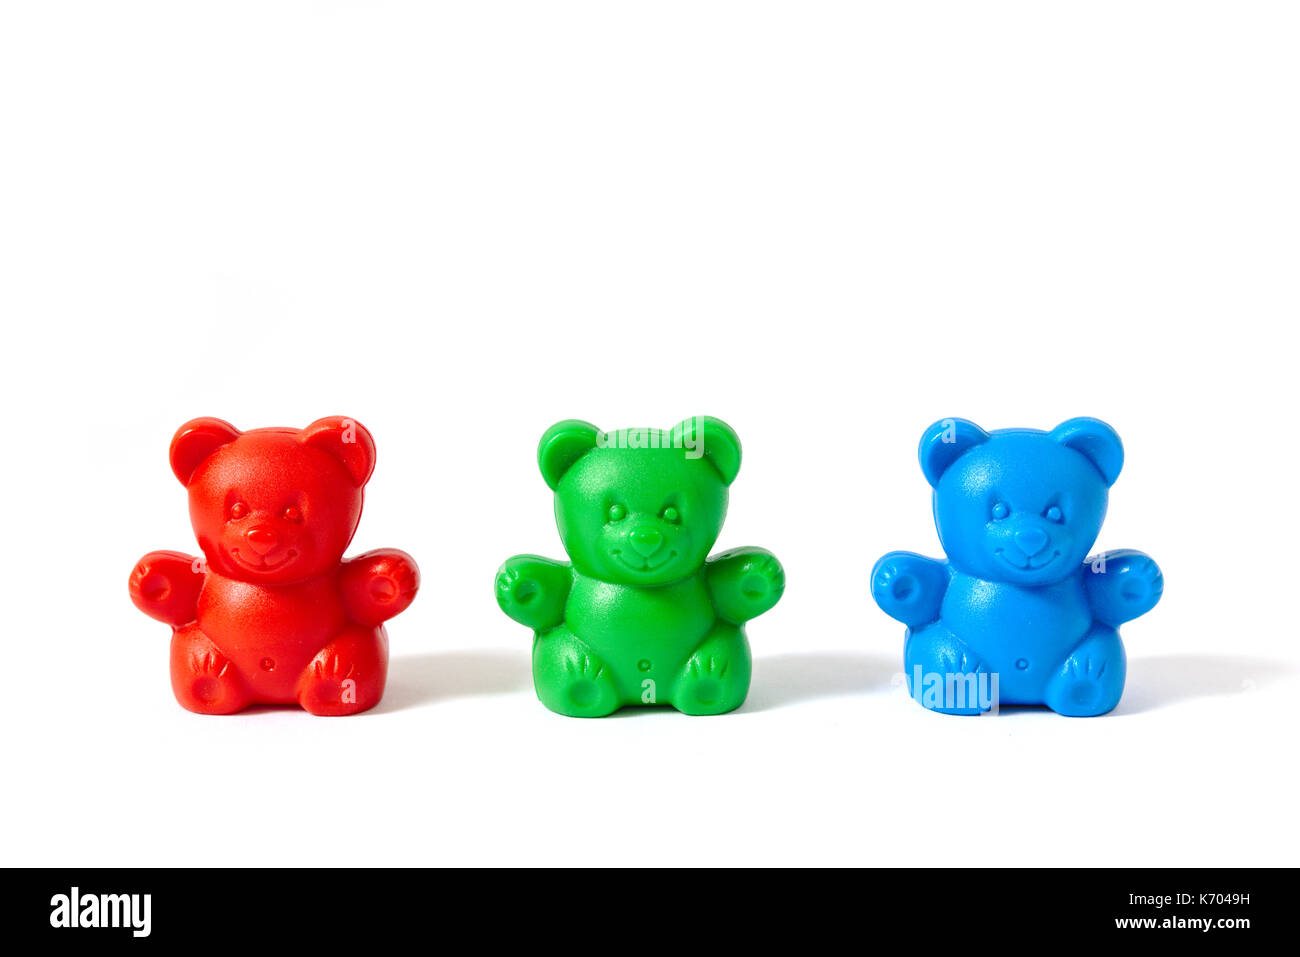 Small red, green and blue plastic toy bears isolated on white background Stock Photo